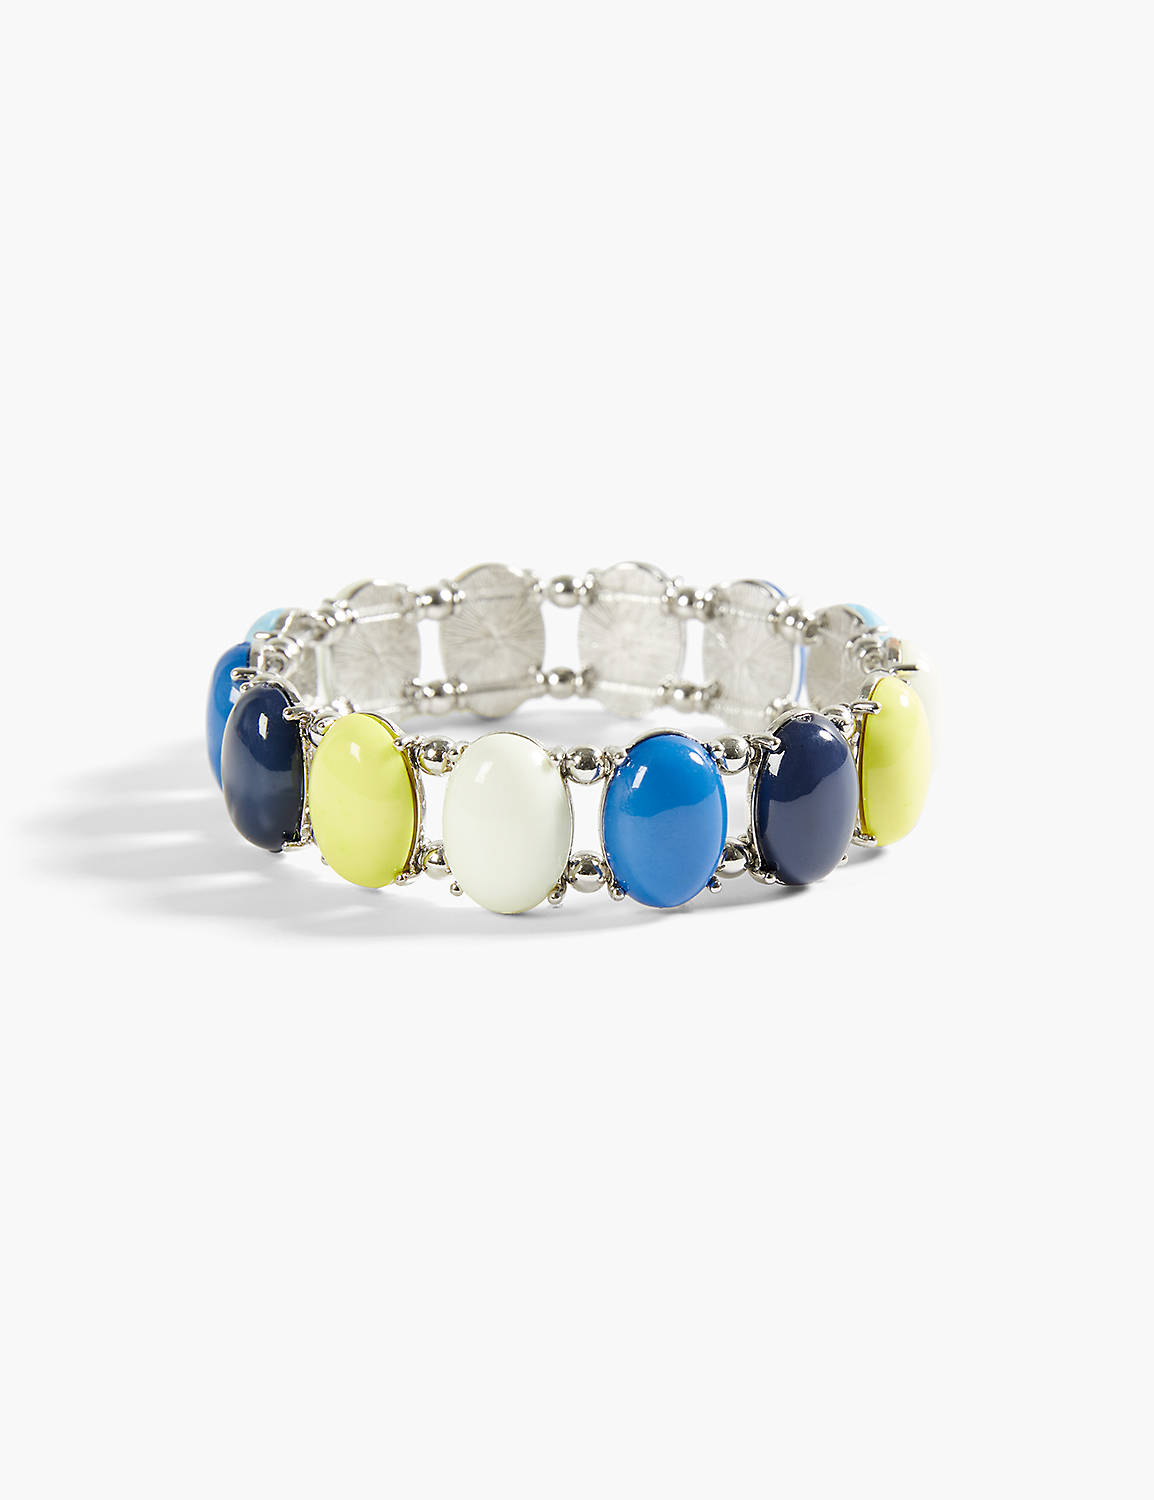 MIXED COLOR STONE STRETCH BRACELET Product Image 1